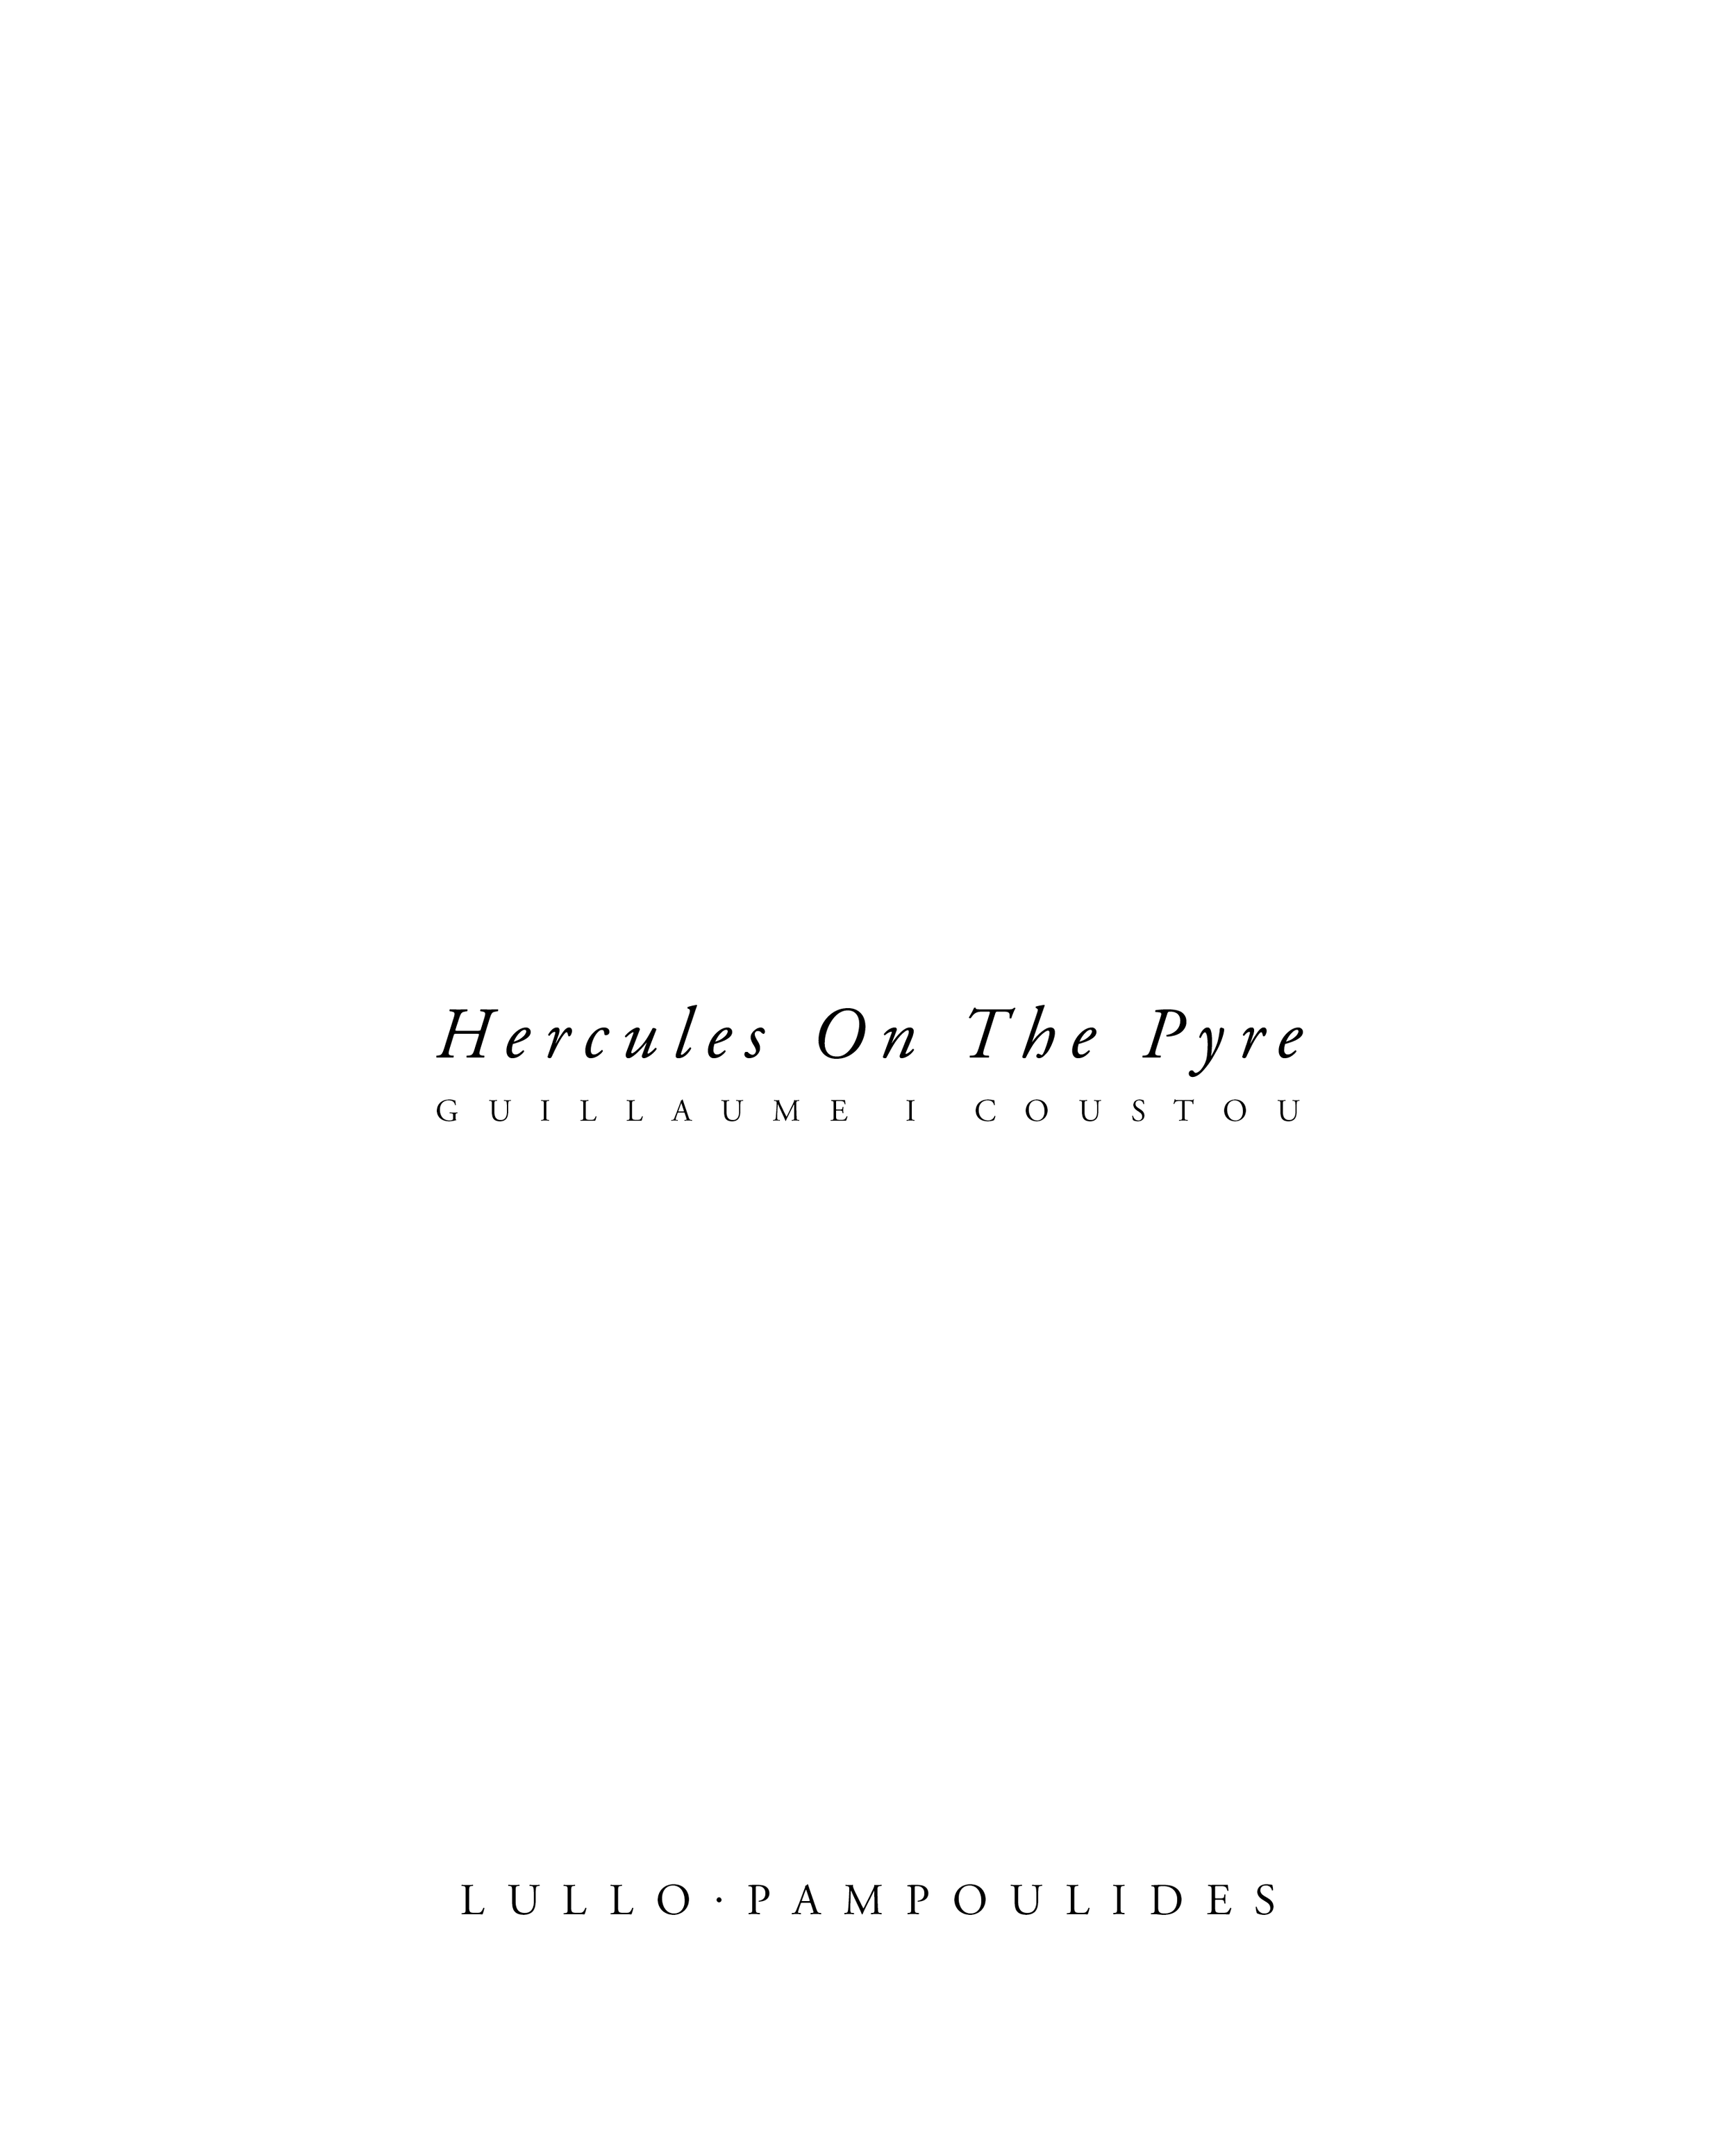 Hercules On The Pyre  |  Guillaume I Coustou